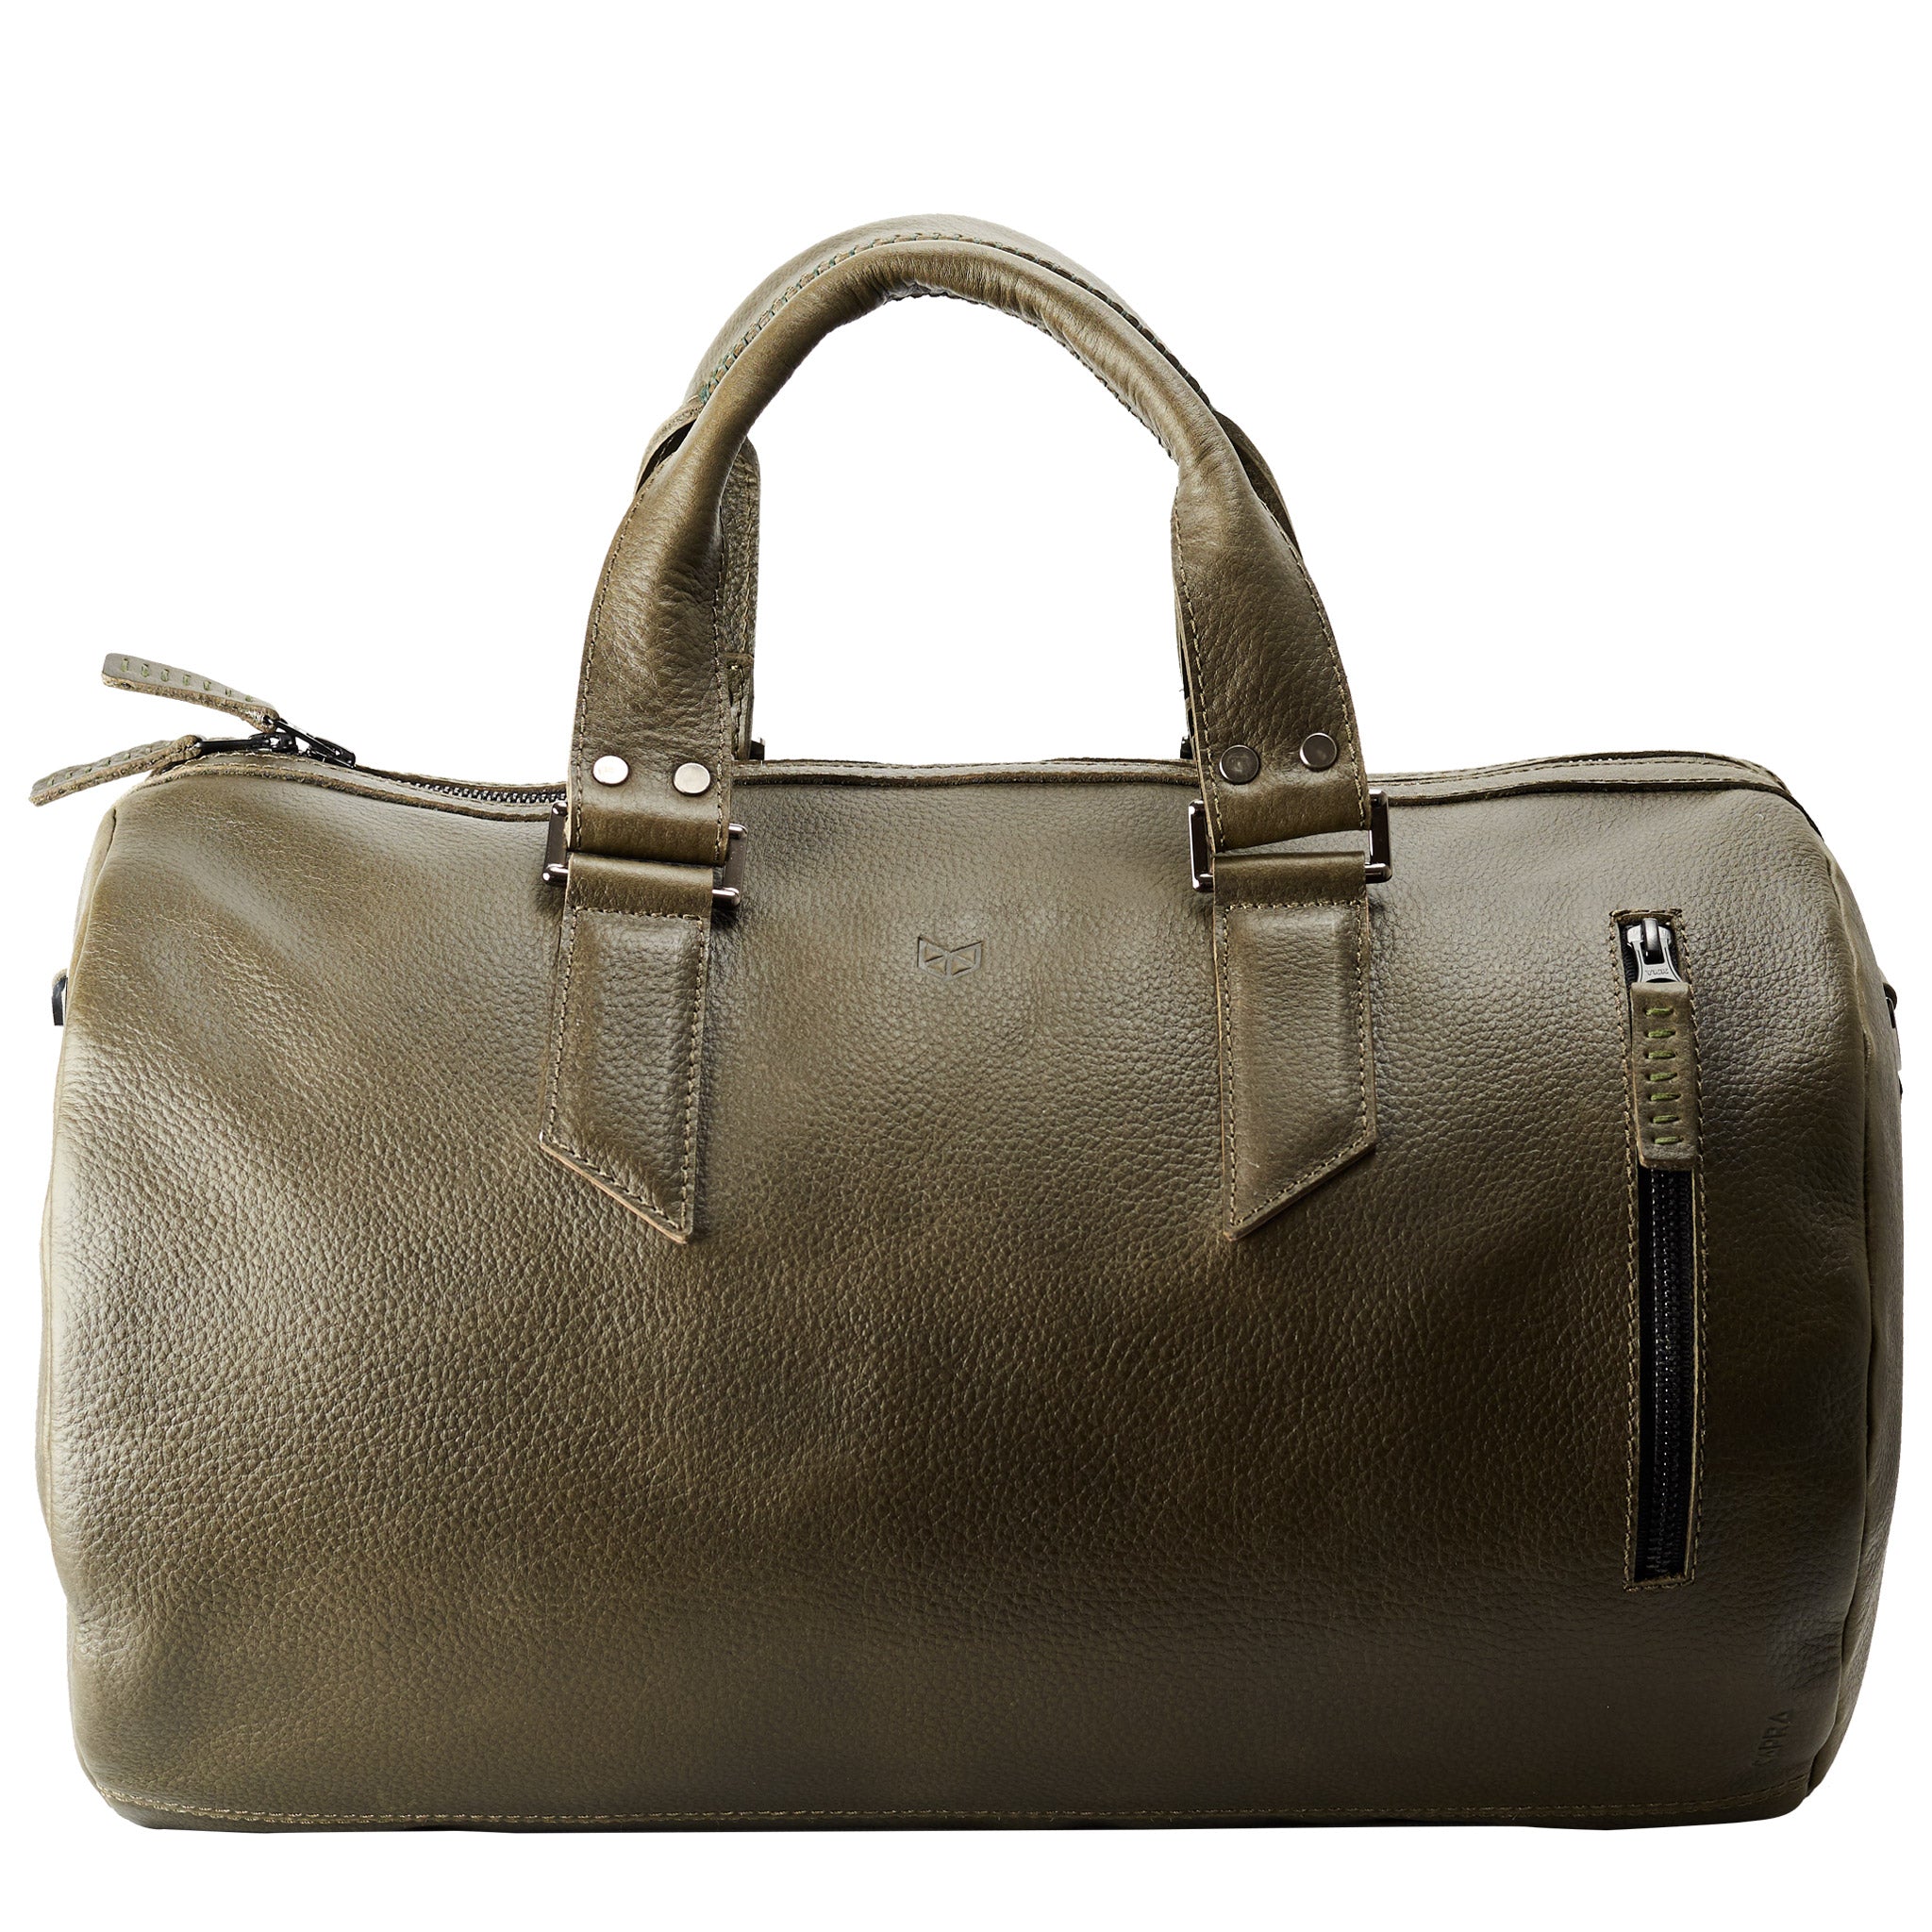 Handmade Substantial Duffle Bag by Capra Leather